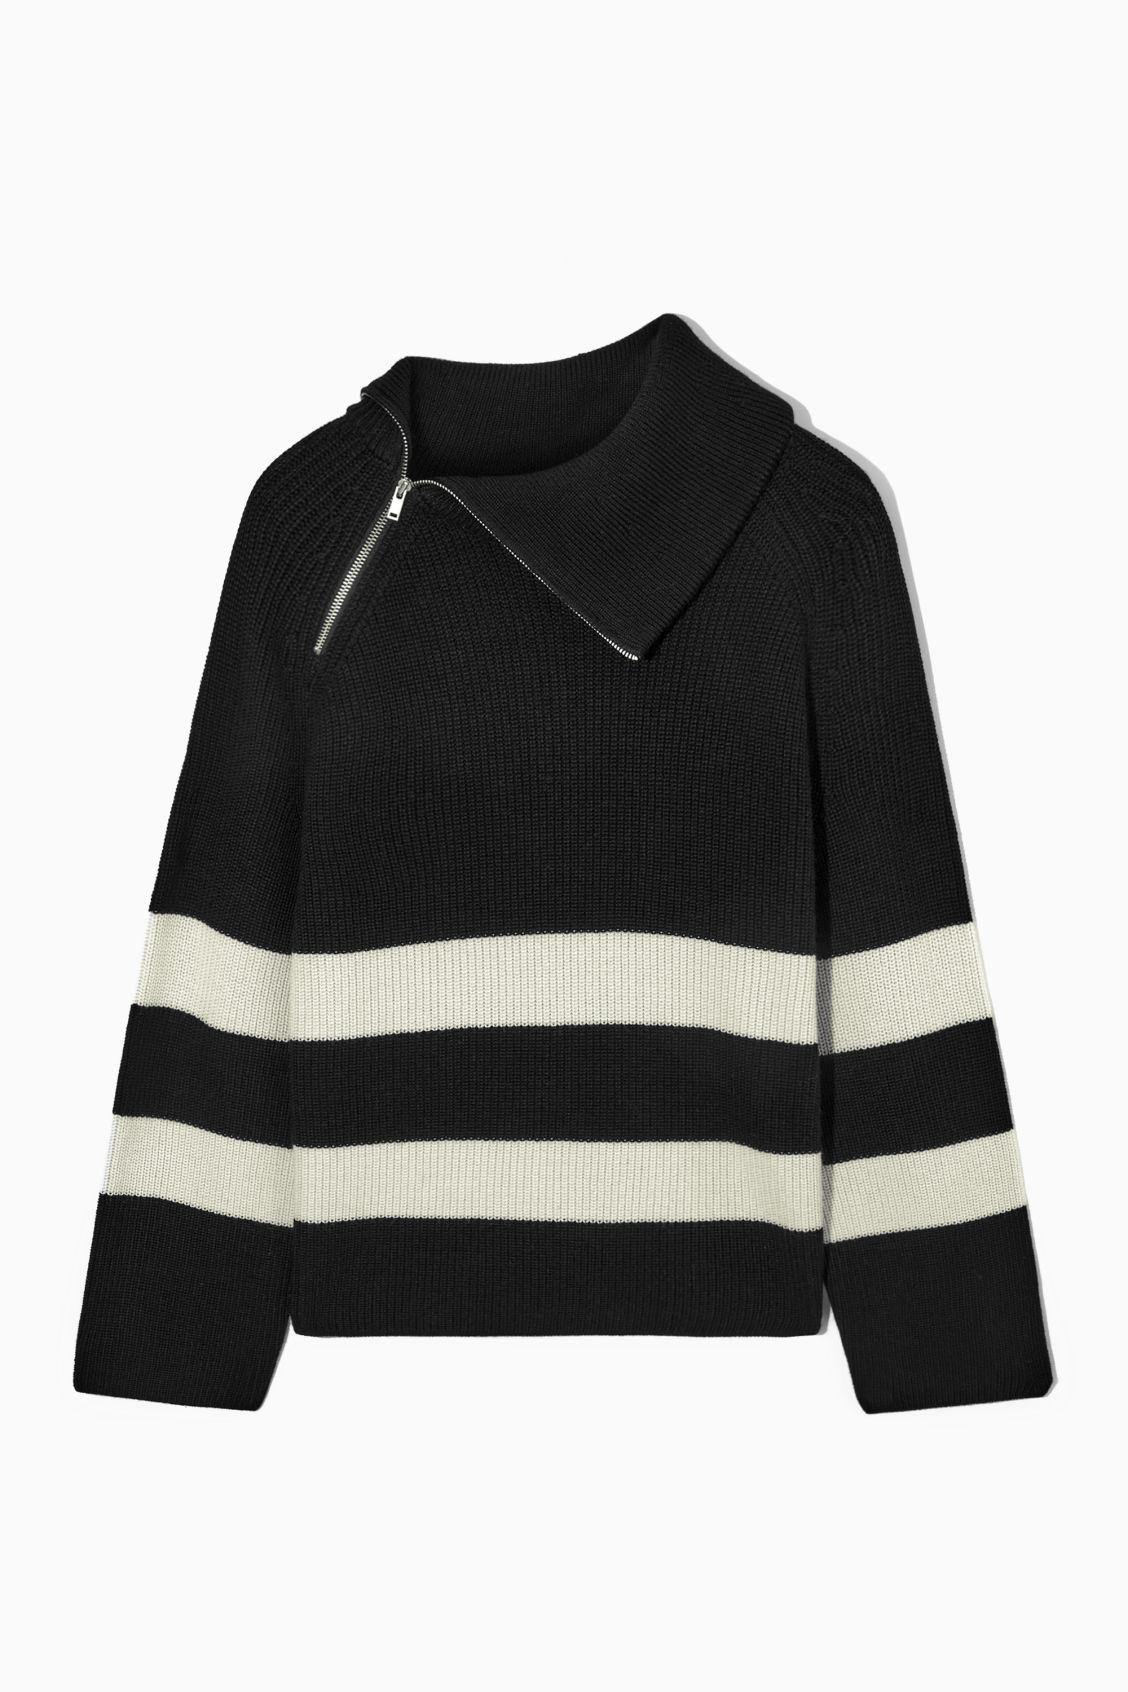 COS Zip-detail Striped Knitted in Black Lyst